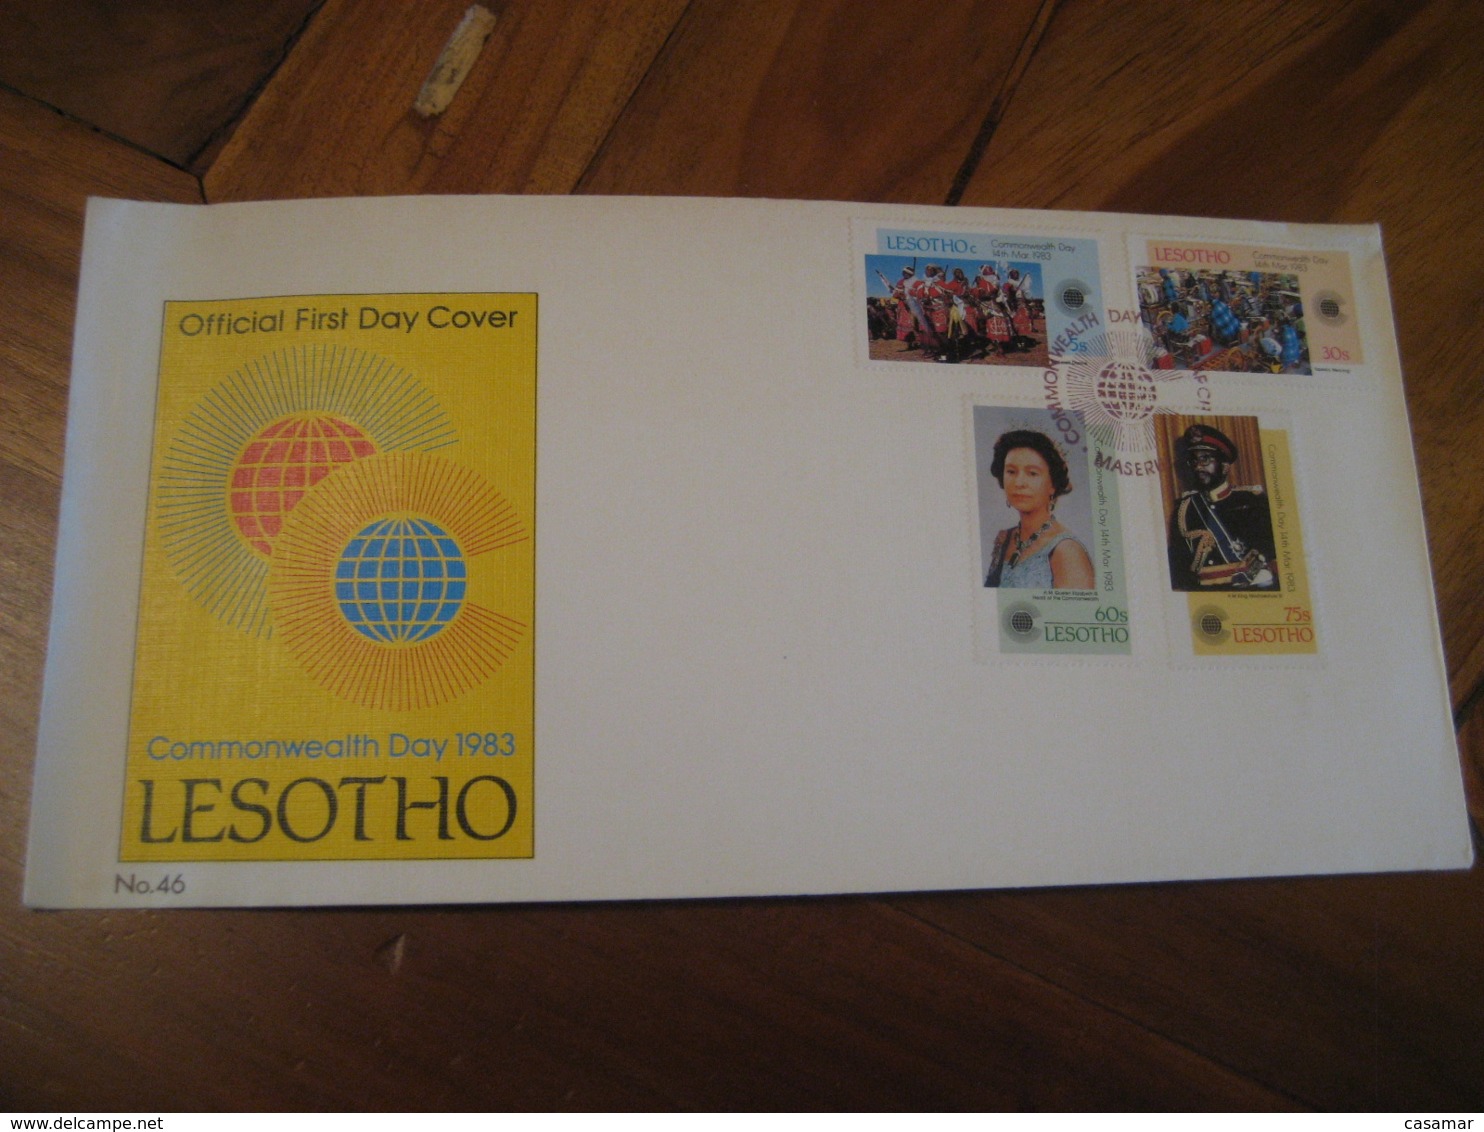 MASERU 1983 Commonwealth Day QEII Royalty FDC Cancel Cover LESOTHO - Lesotho (1966-...)